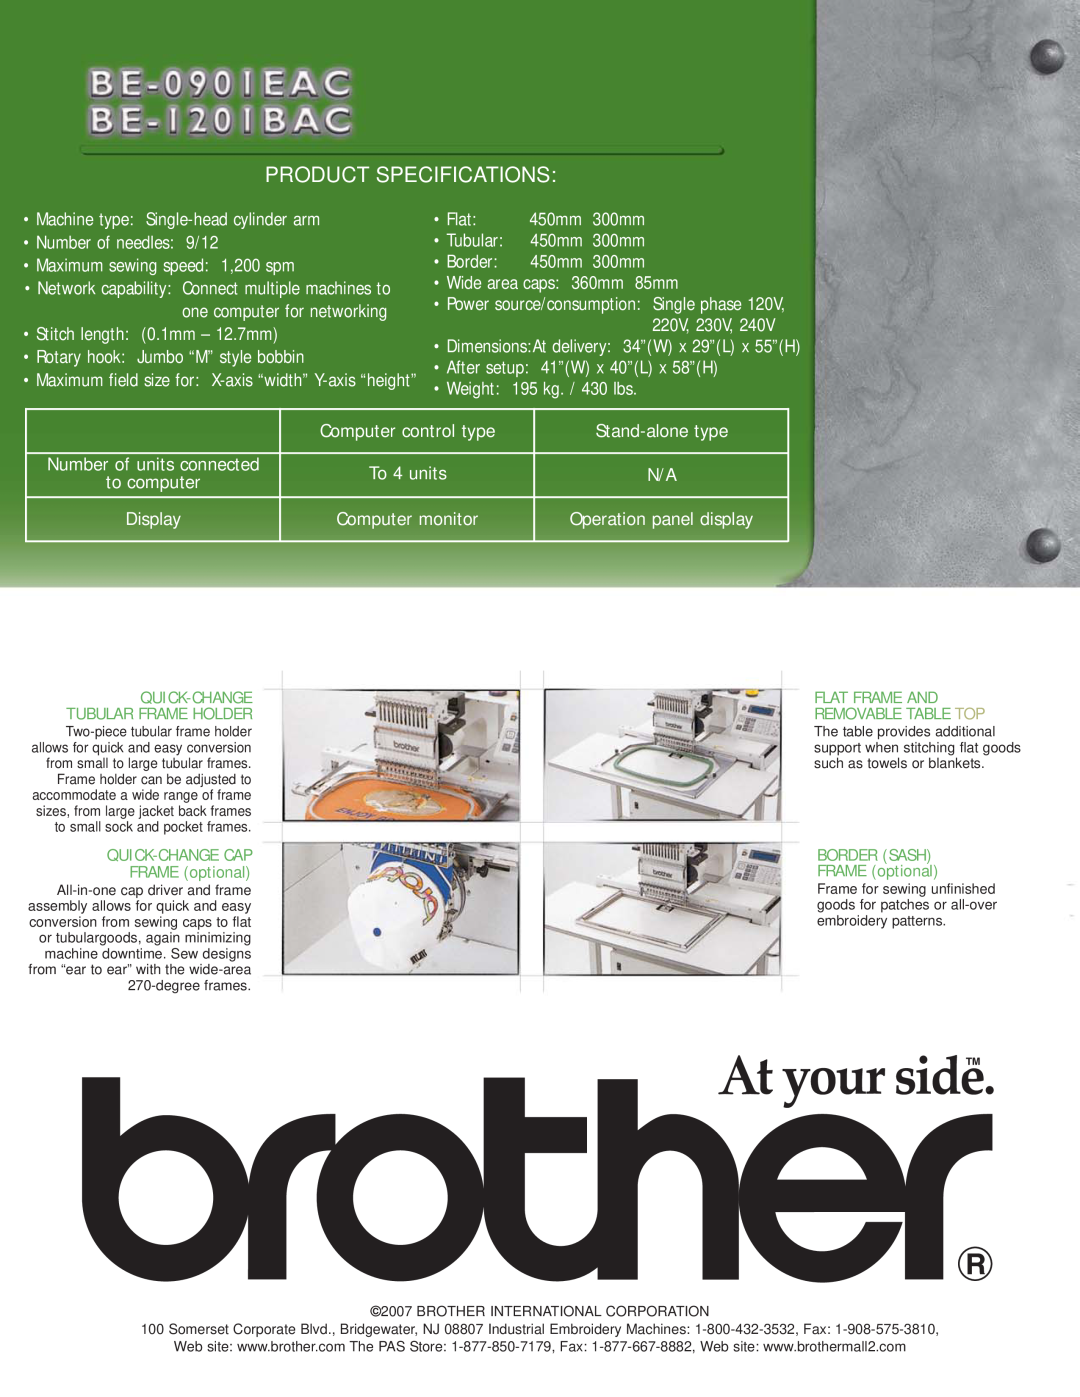 Brother BE-1201BAC, BE-0901EAC manual Product Specifications 